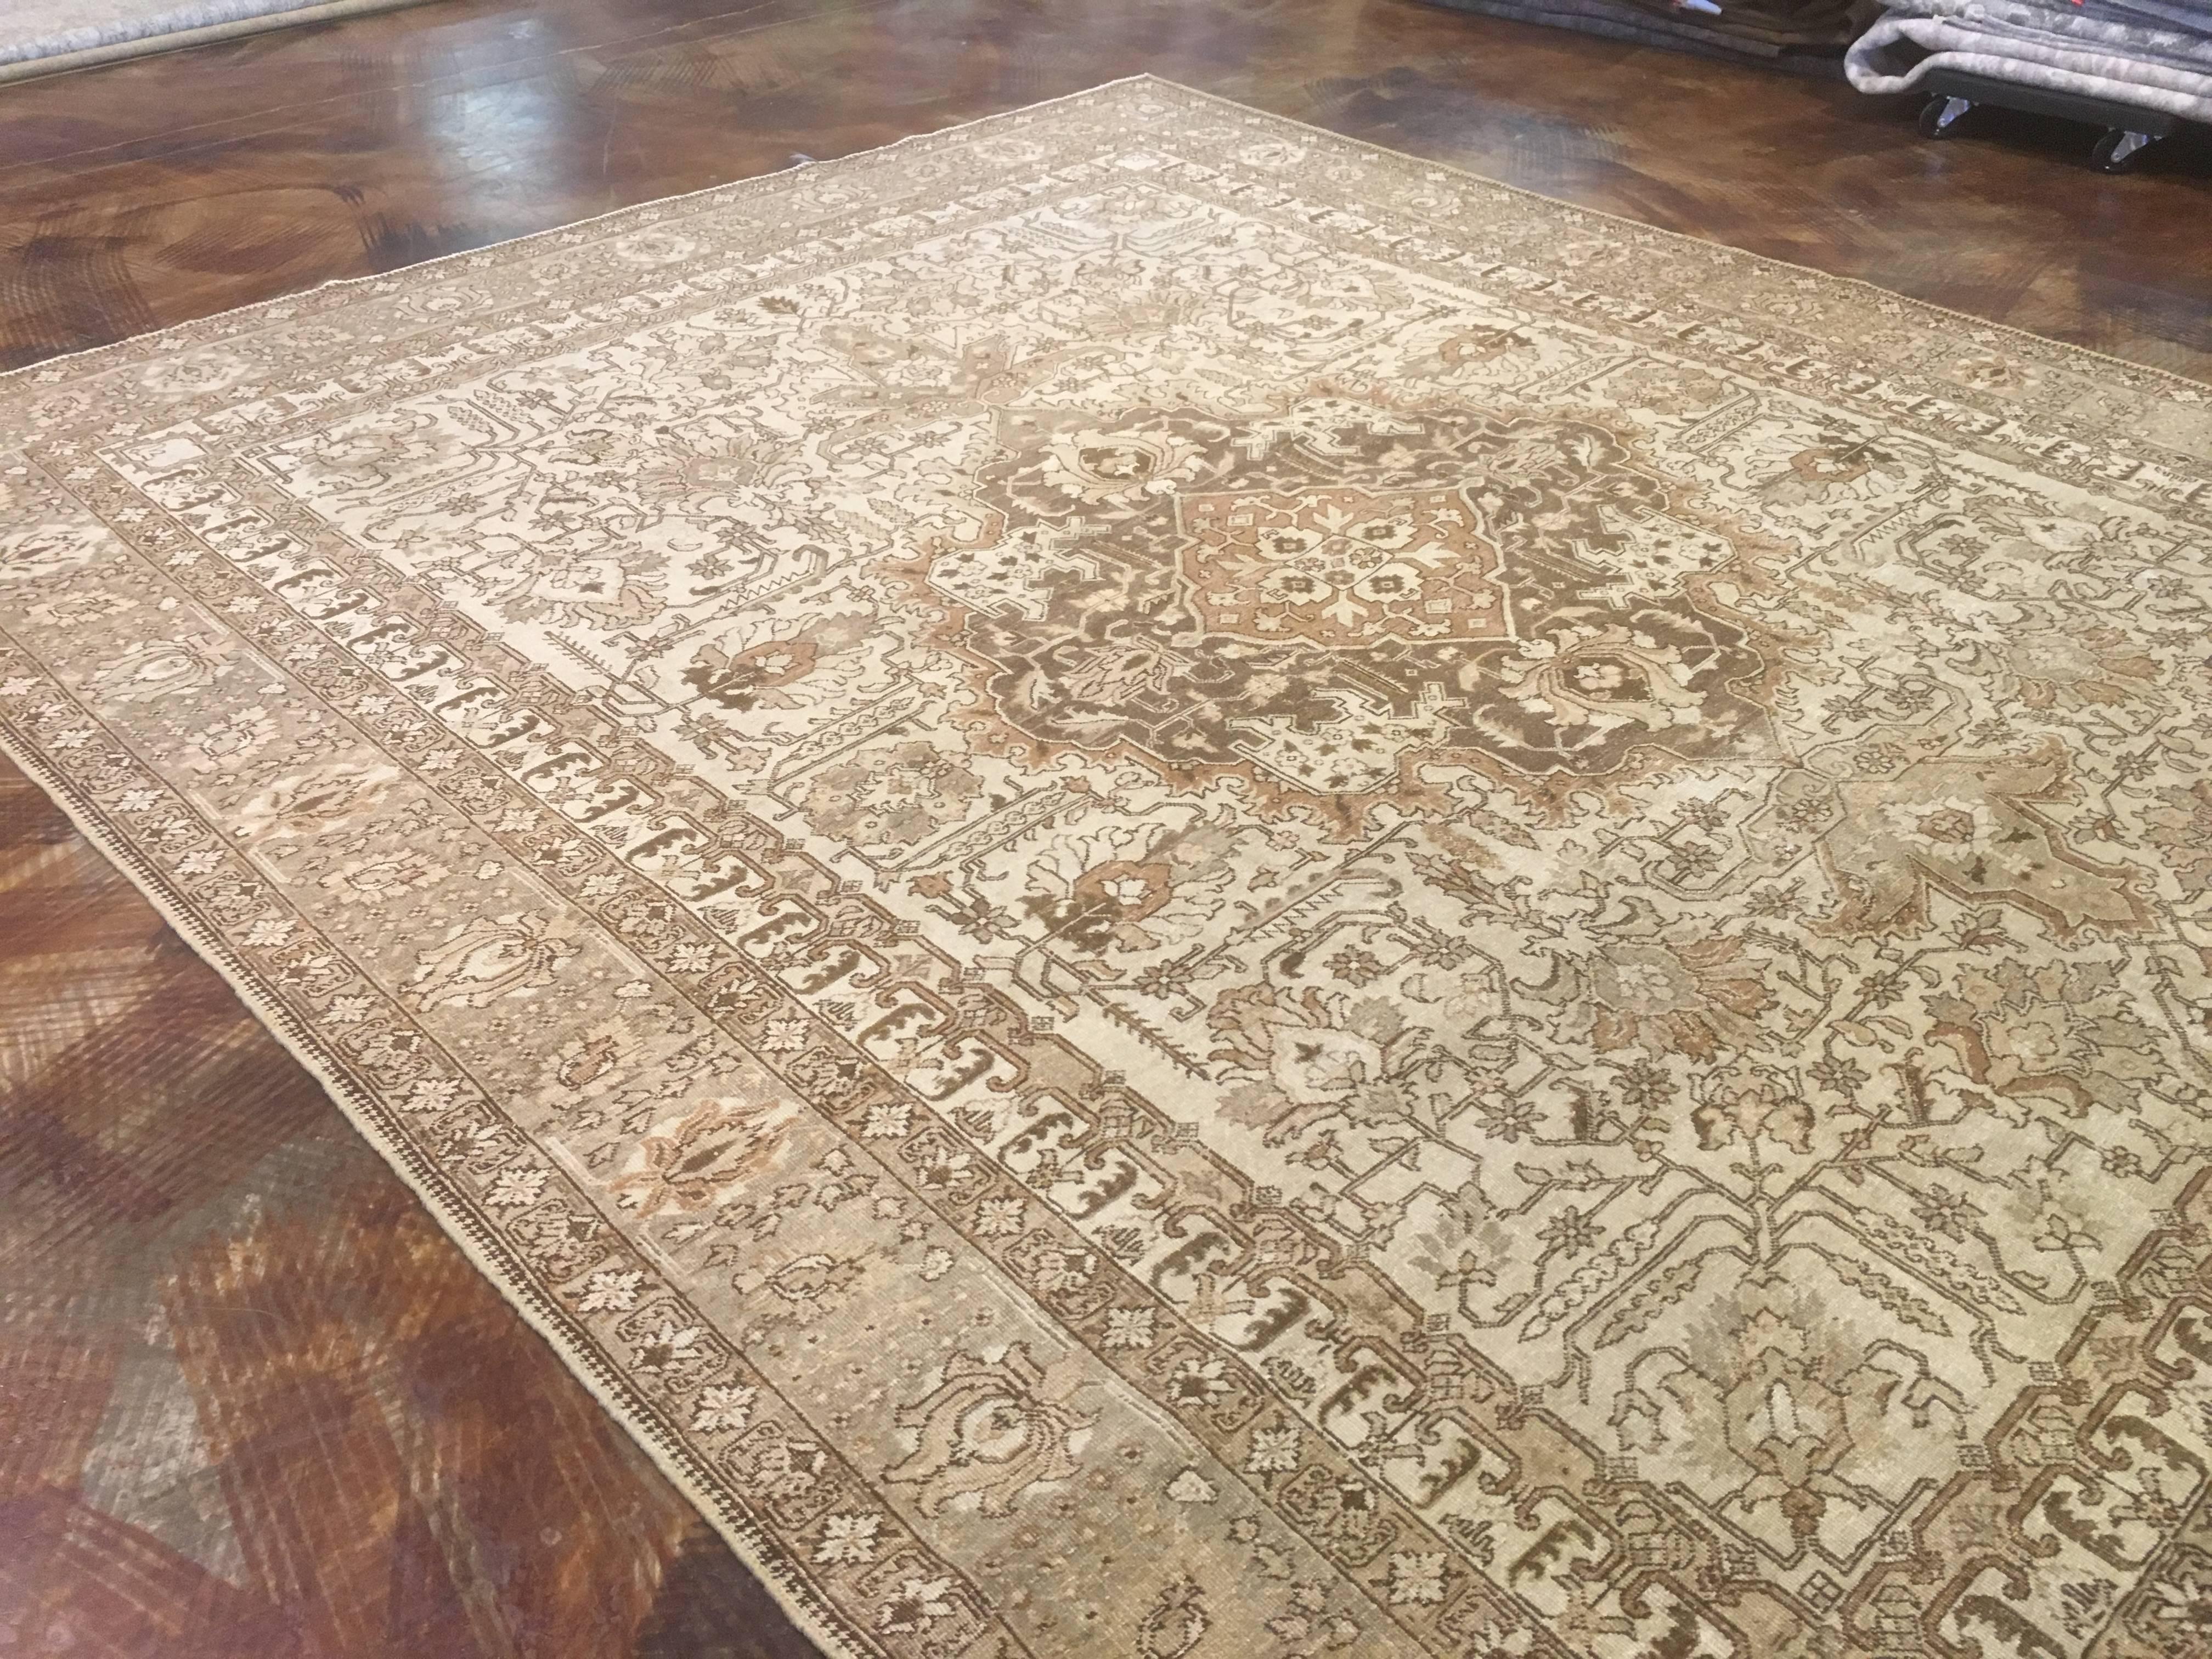 Persian Tabriz woven around the early 1900s 8.10 x 11 ft. it is in excellent low pile condition. 
Very soft earth-tone colors have been achieved in a sun-wash process. This process is a very slow and safe way to bring down the strong tones to